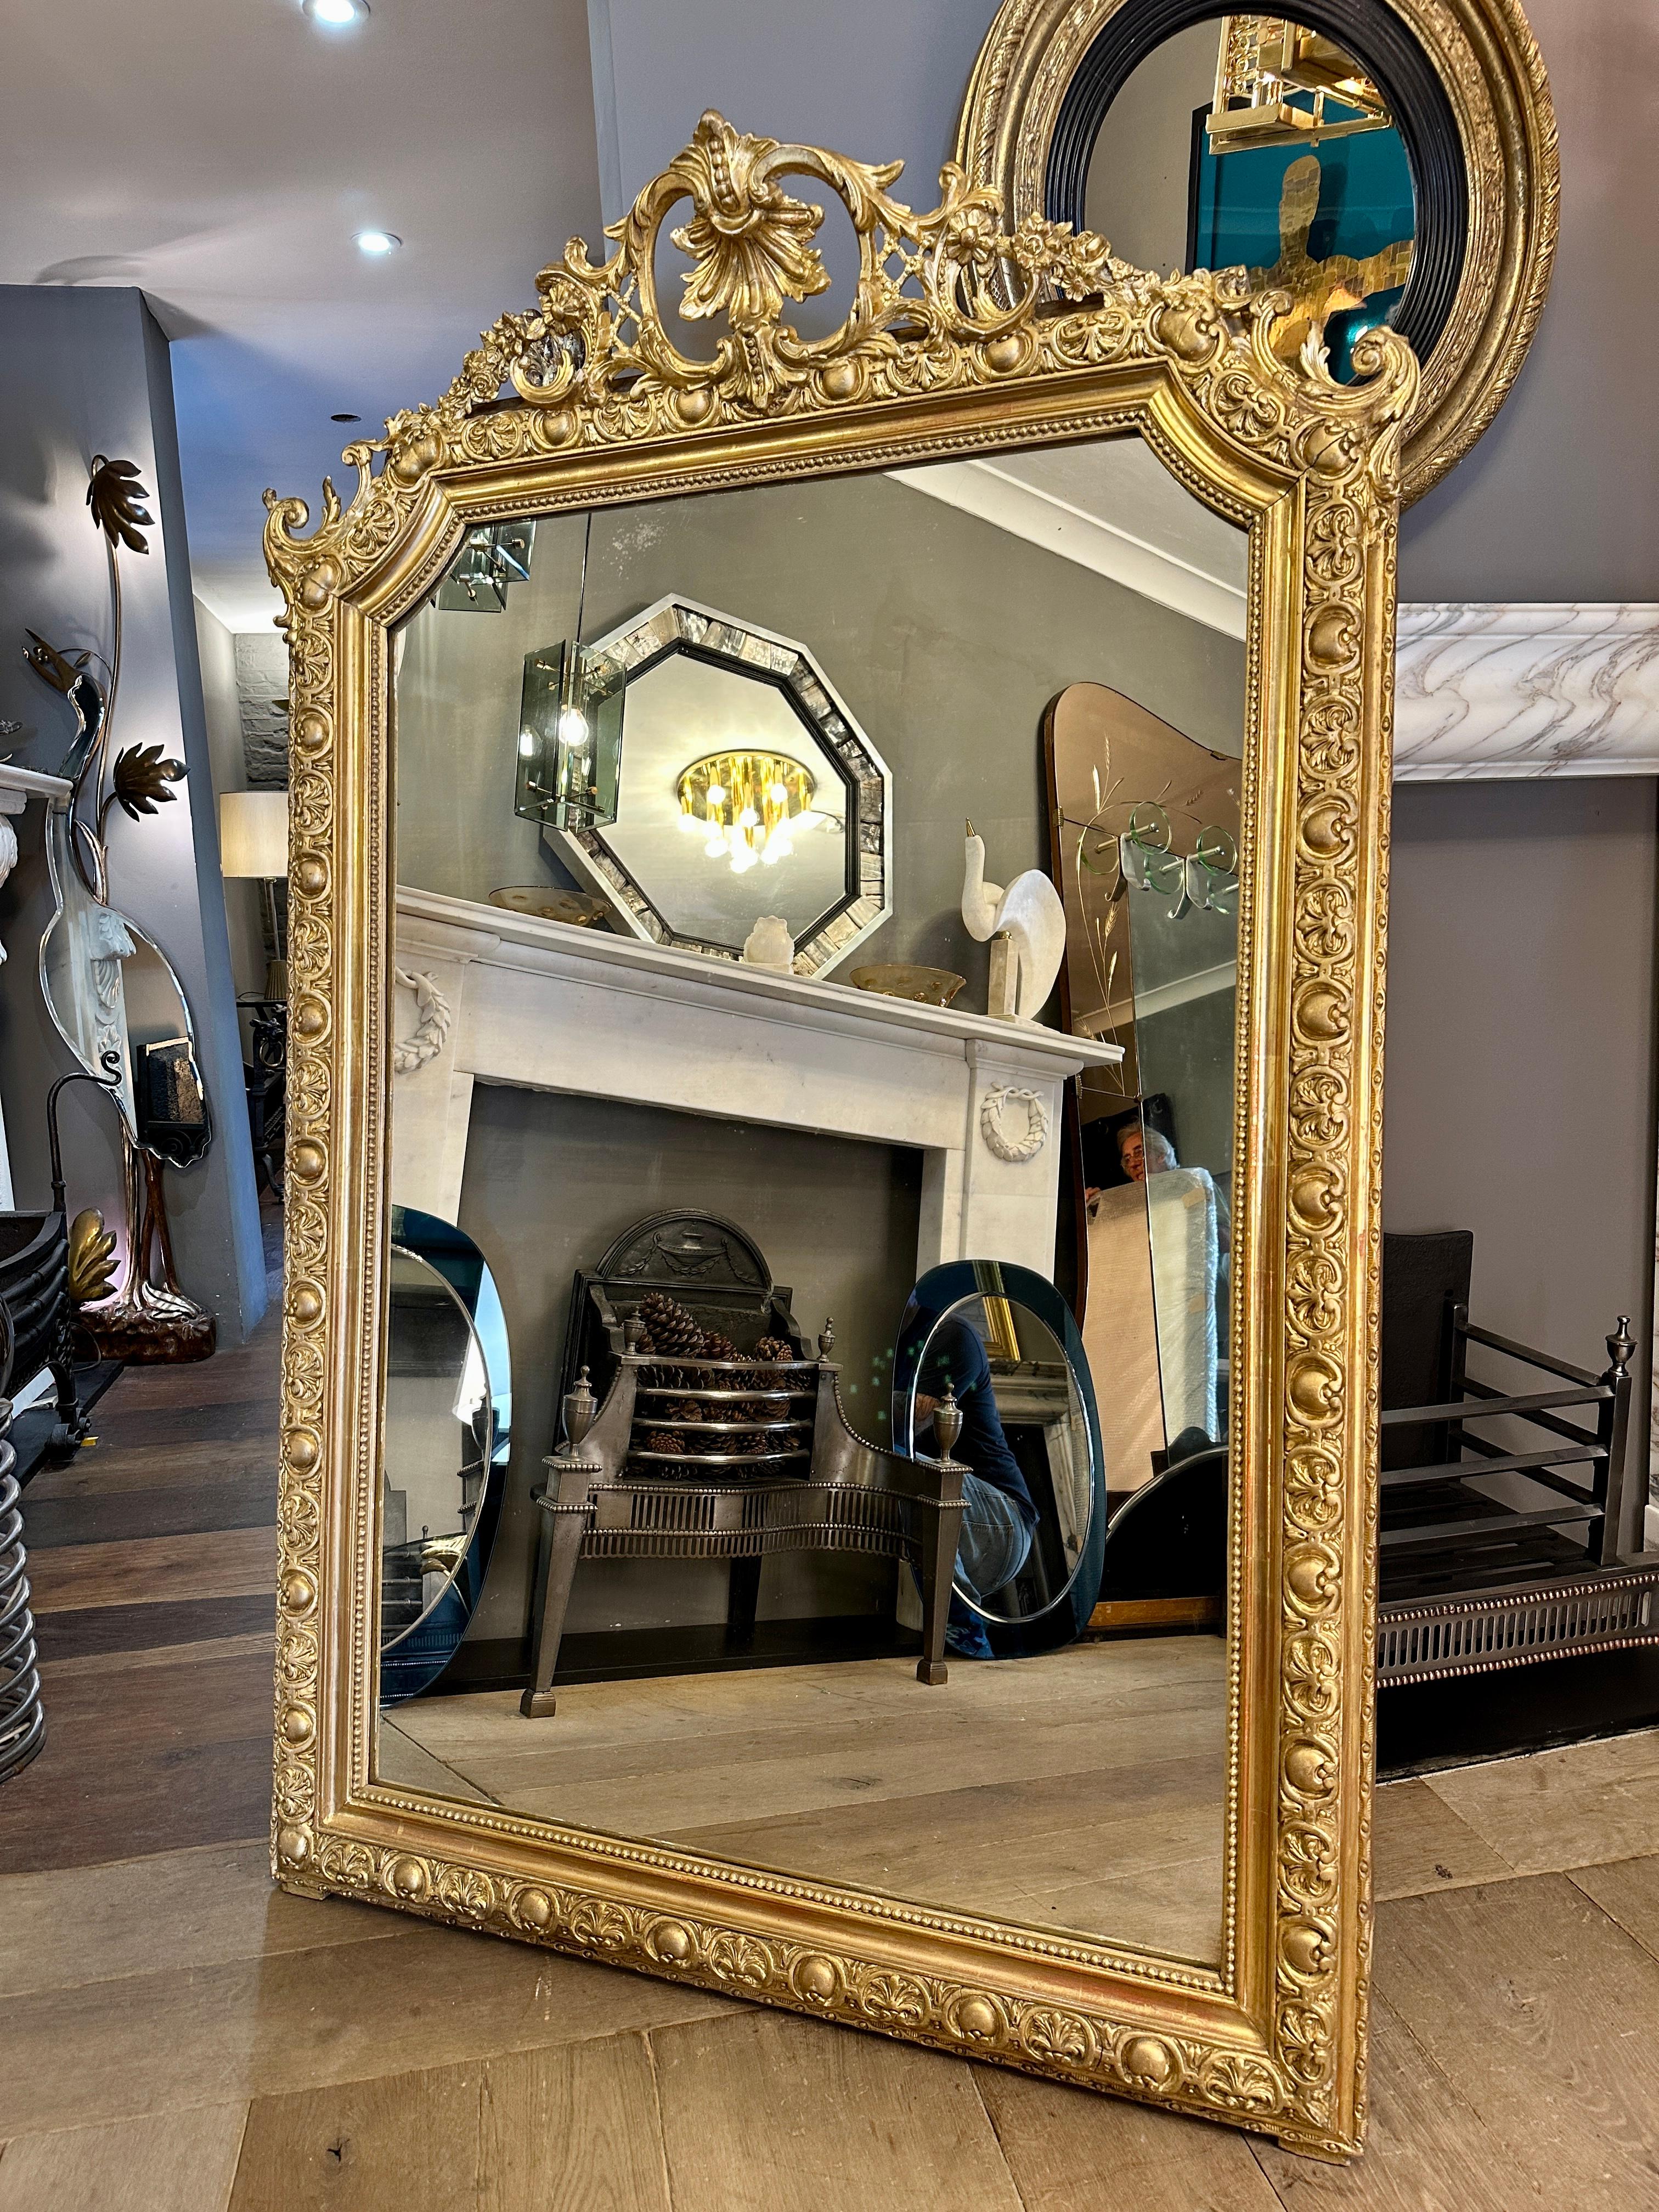 A large and ornate Napoleon III period gold gilt mirror, imported from Paris. Purchased from an apartment in the Avenue de Opera, with a Marie Antoinette countryside inspired design. Original plate and backboards. 